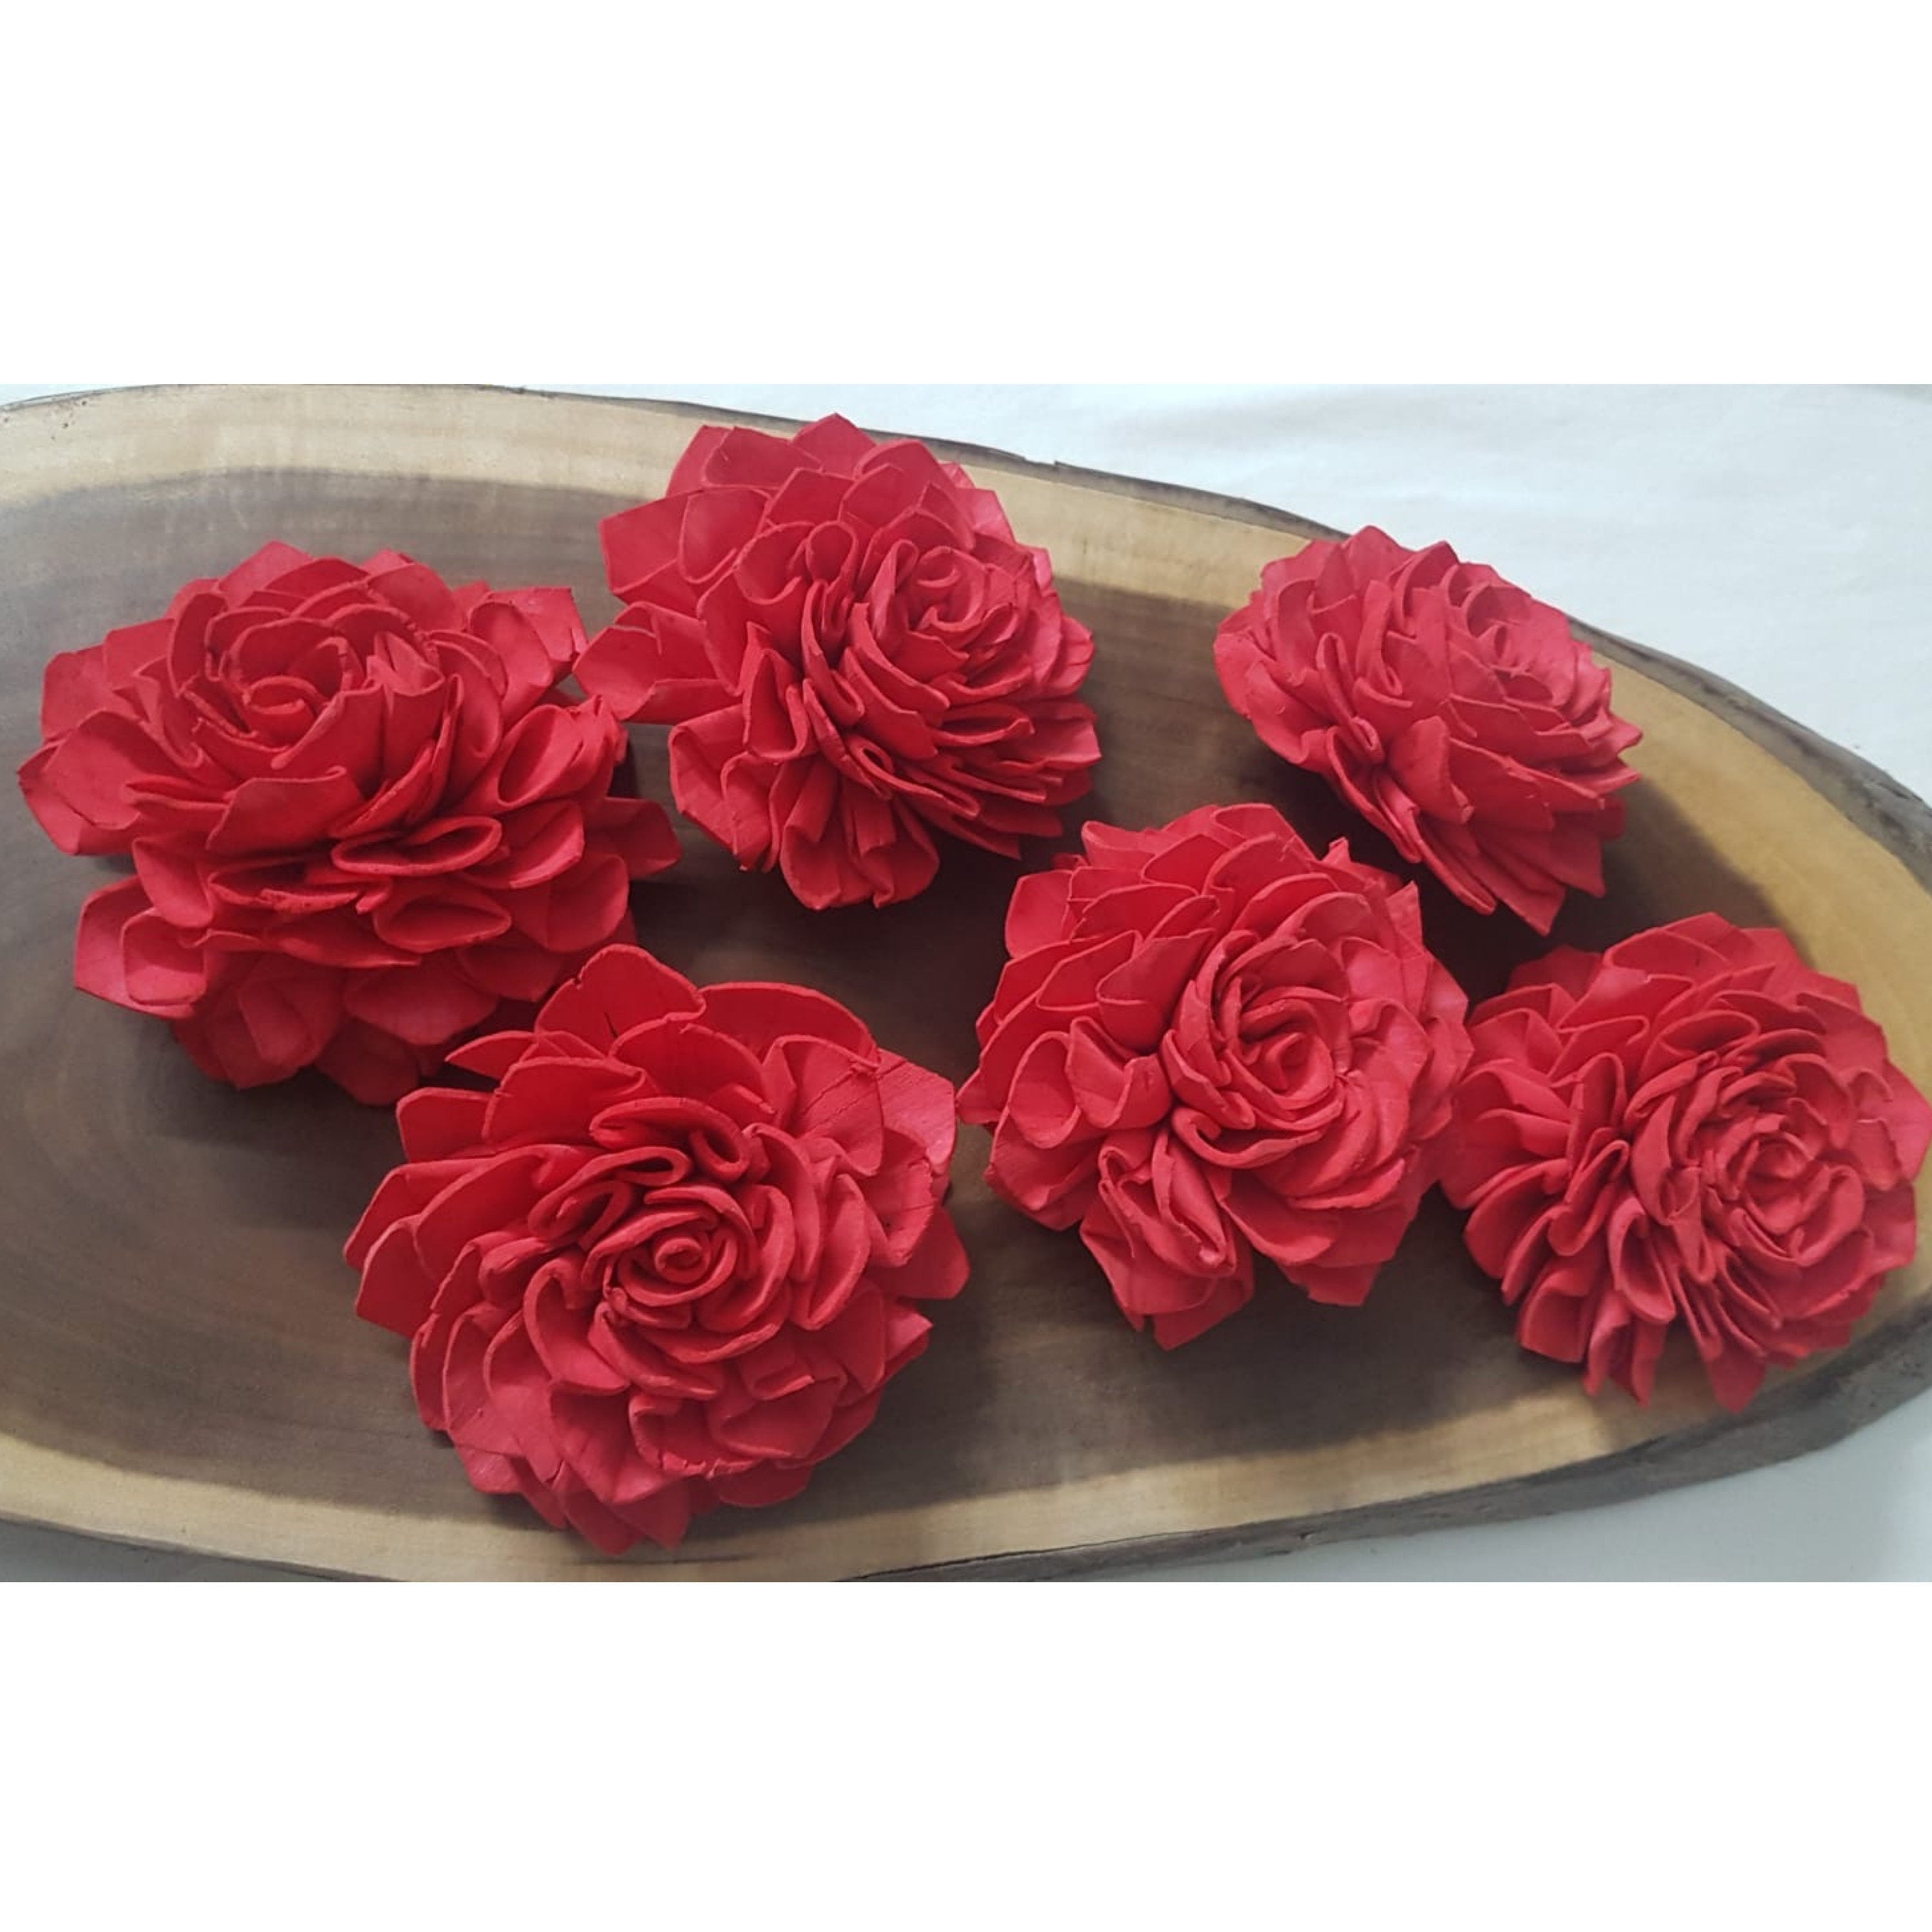 Solawood Flowers Random (No Bark), Artificial Flowers for Decoration (red)